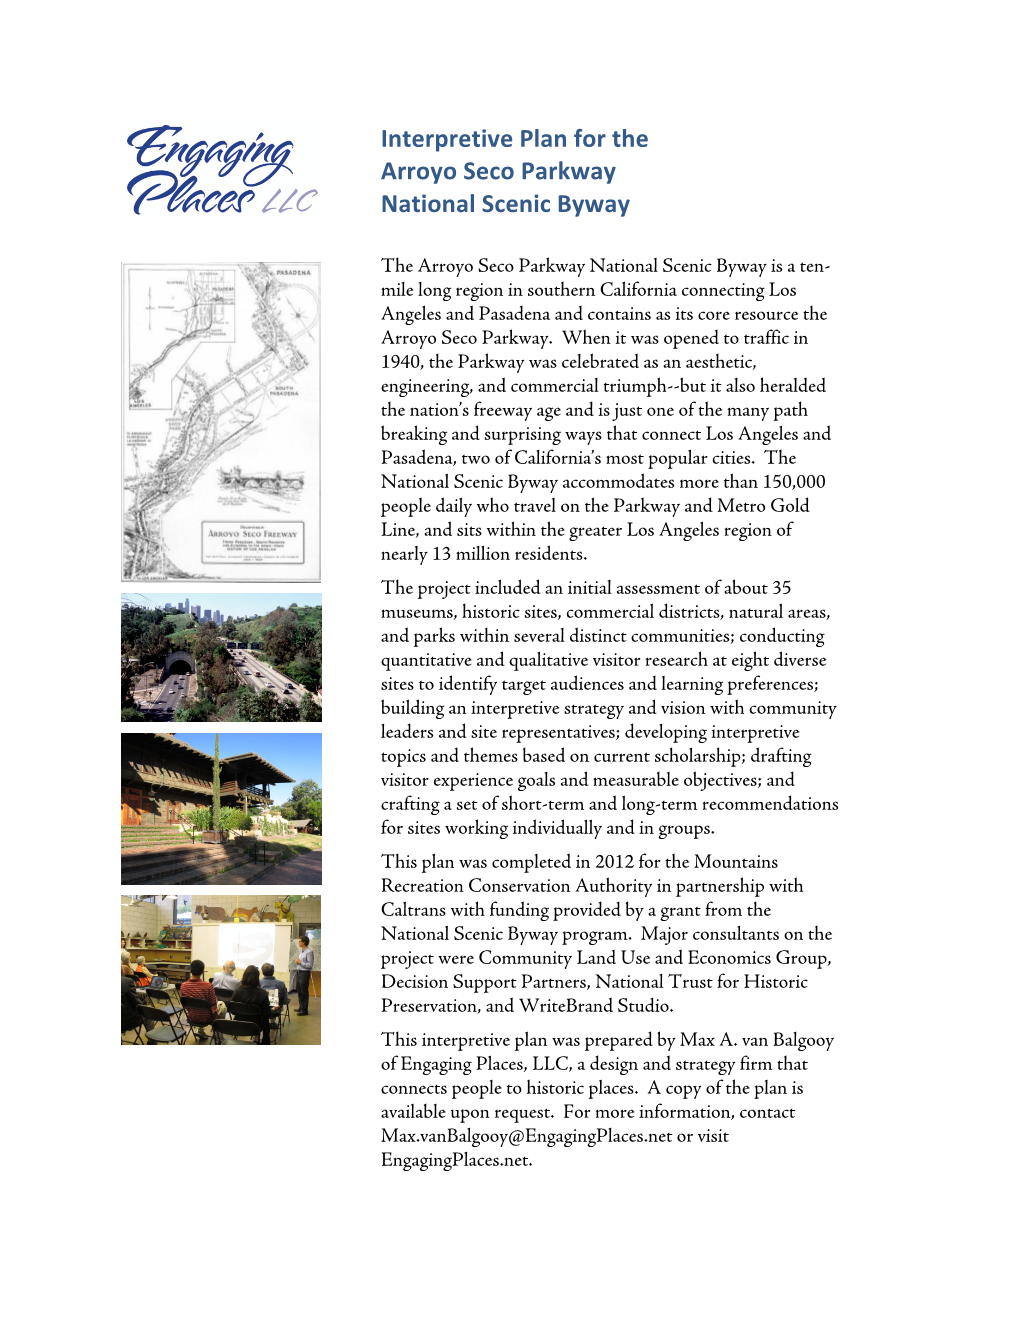 Interpretive Plan for the Arroyo Seco Parkway National Scenic Byway